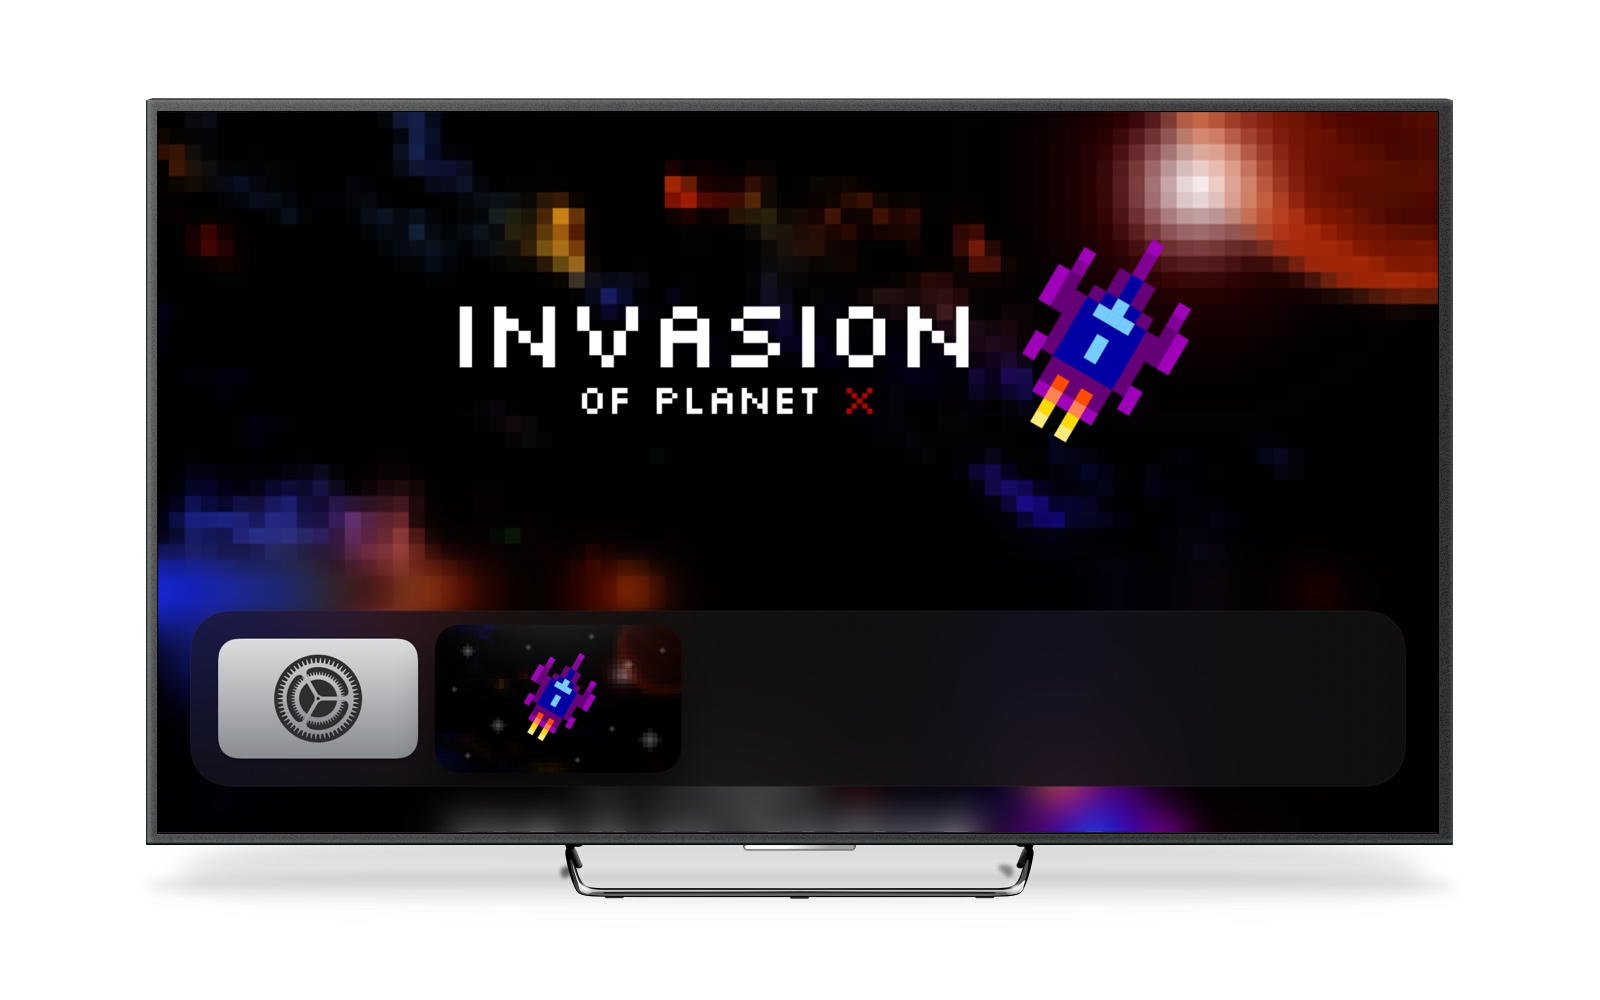 An image of a TV displaying the home screen of an Apple TV. On the screen, there is an app icon to launch Invasion of Planet X.